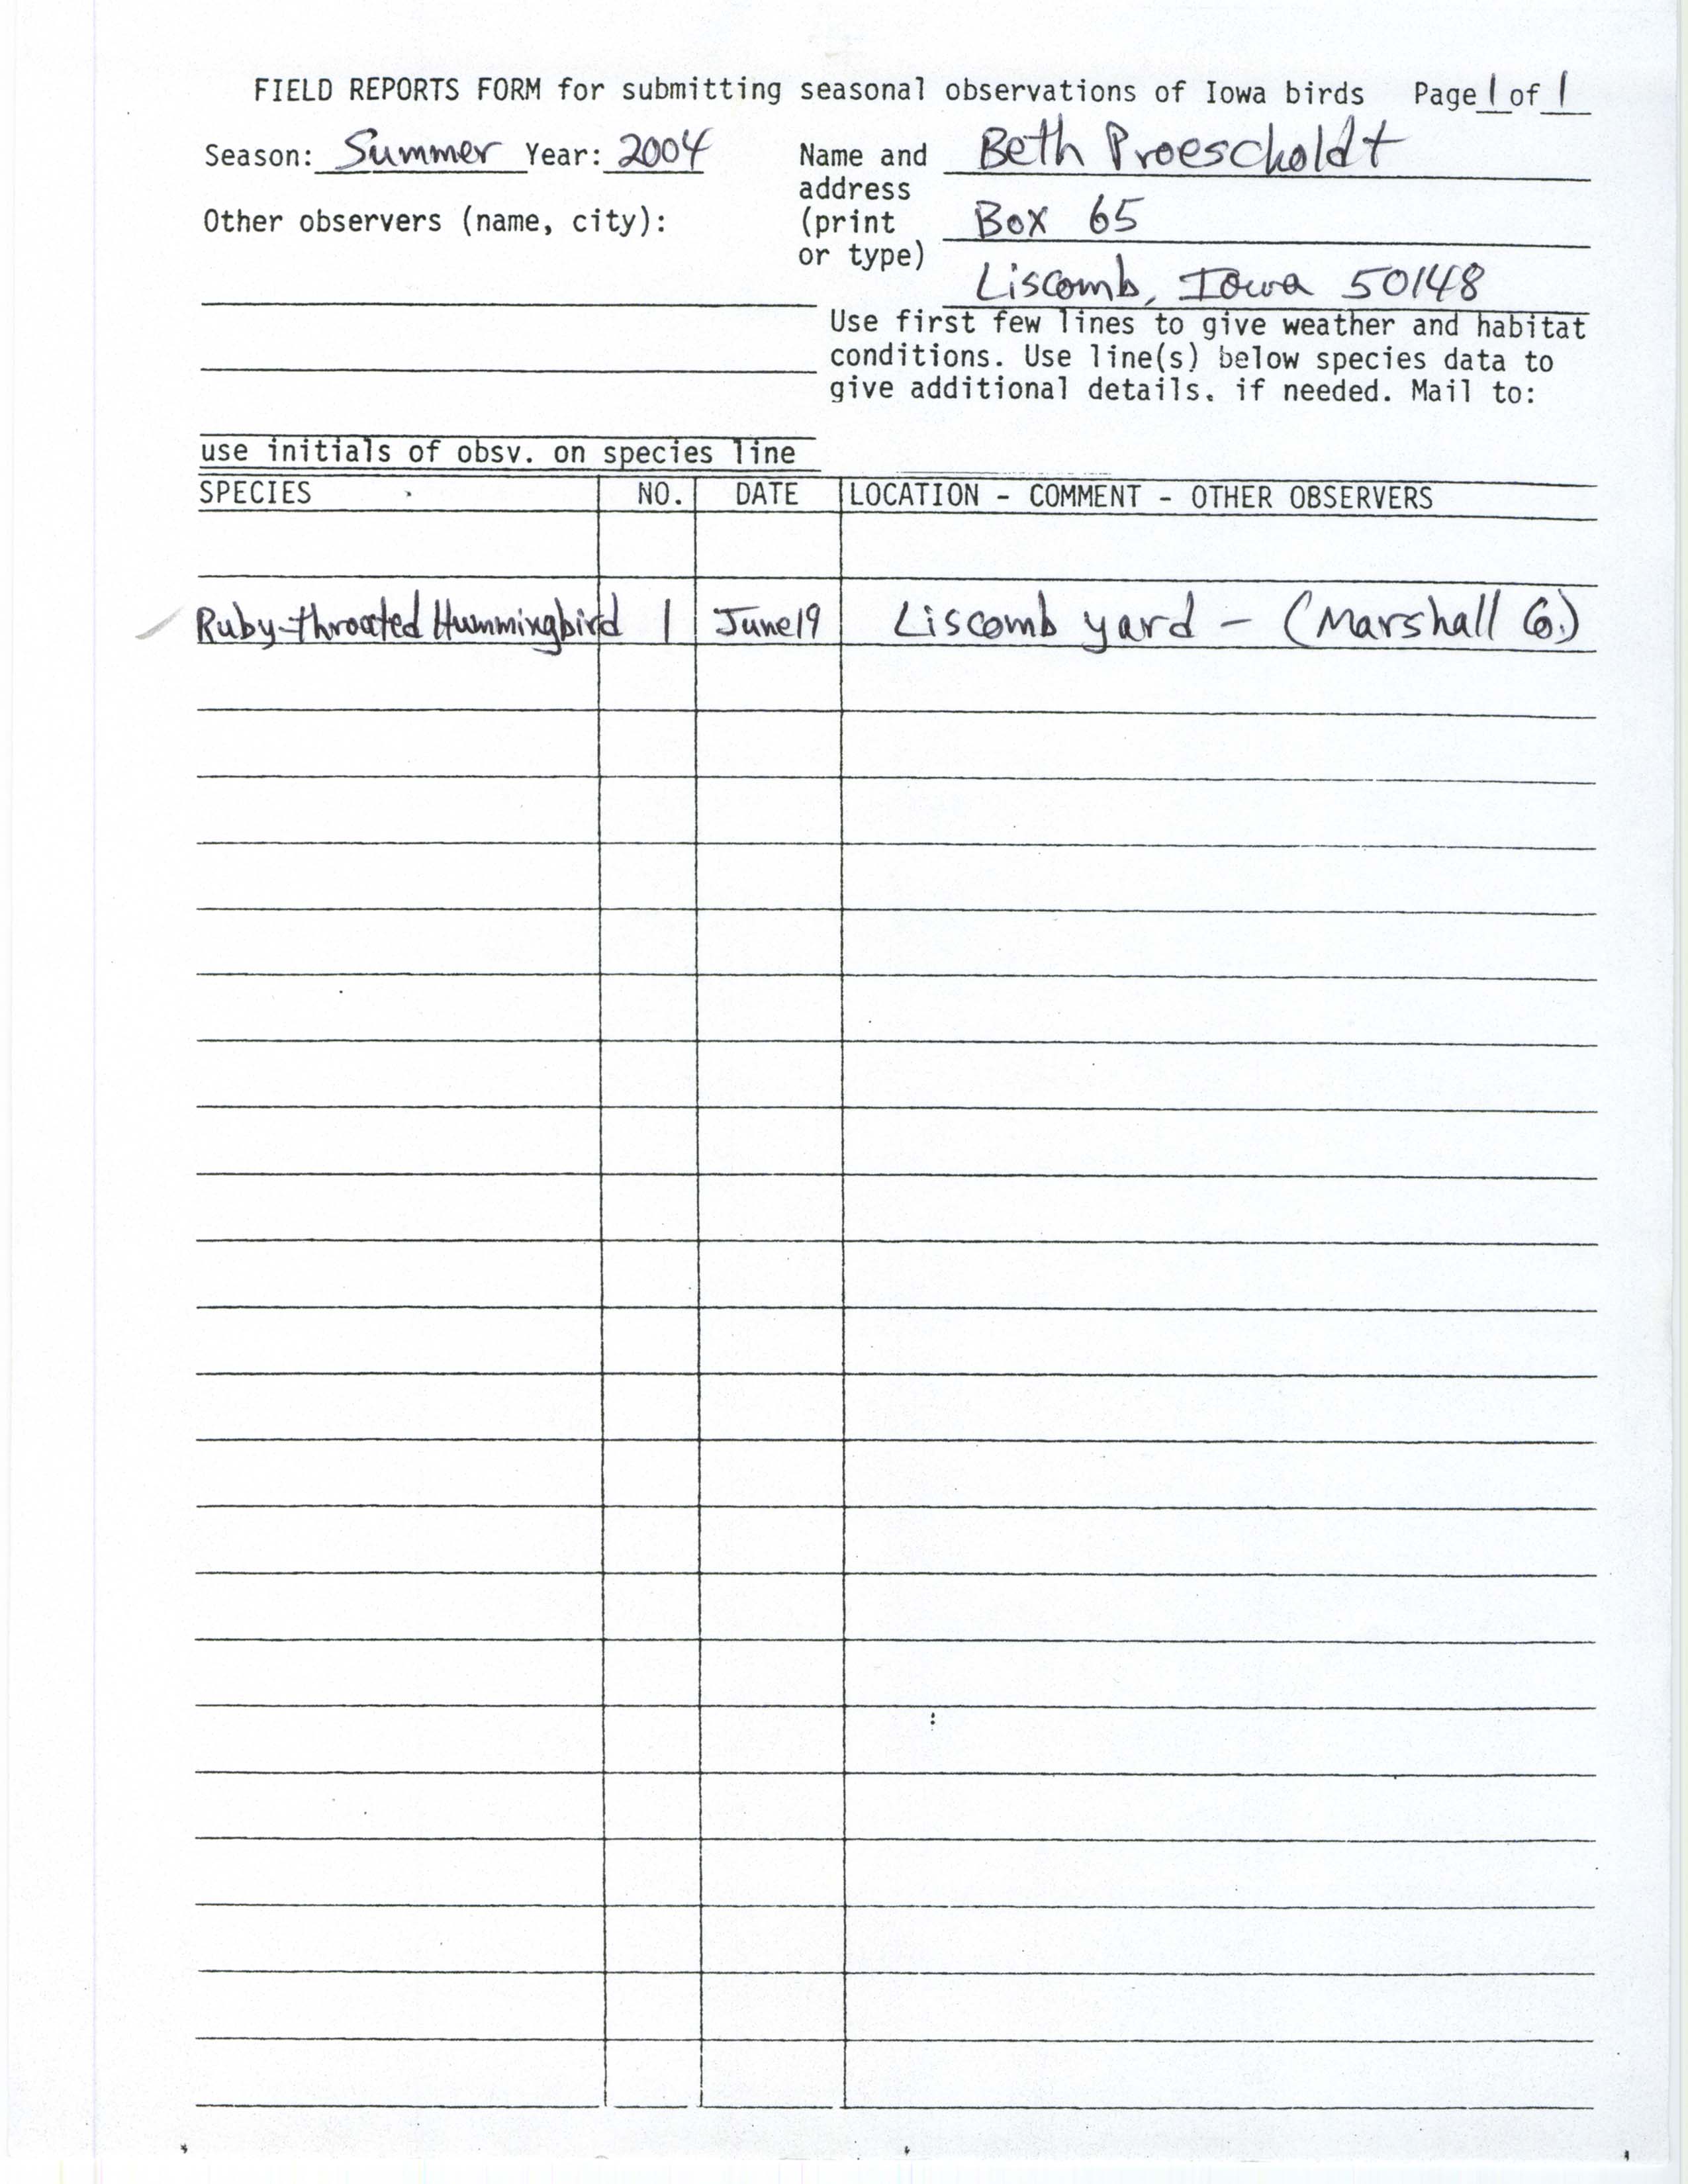 Field reports form for submitting seasonal observations of Iowa birds, Beth Proescholdt, summer 2004